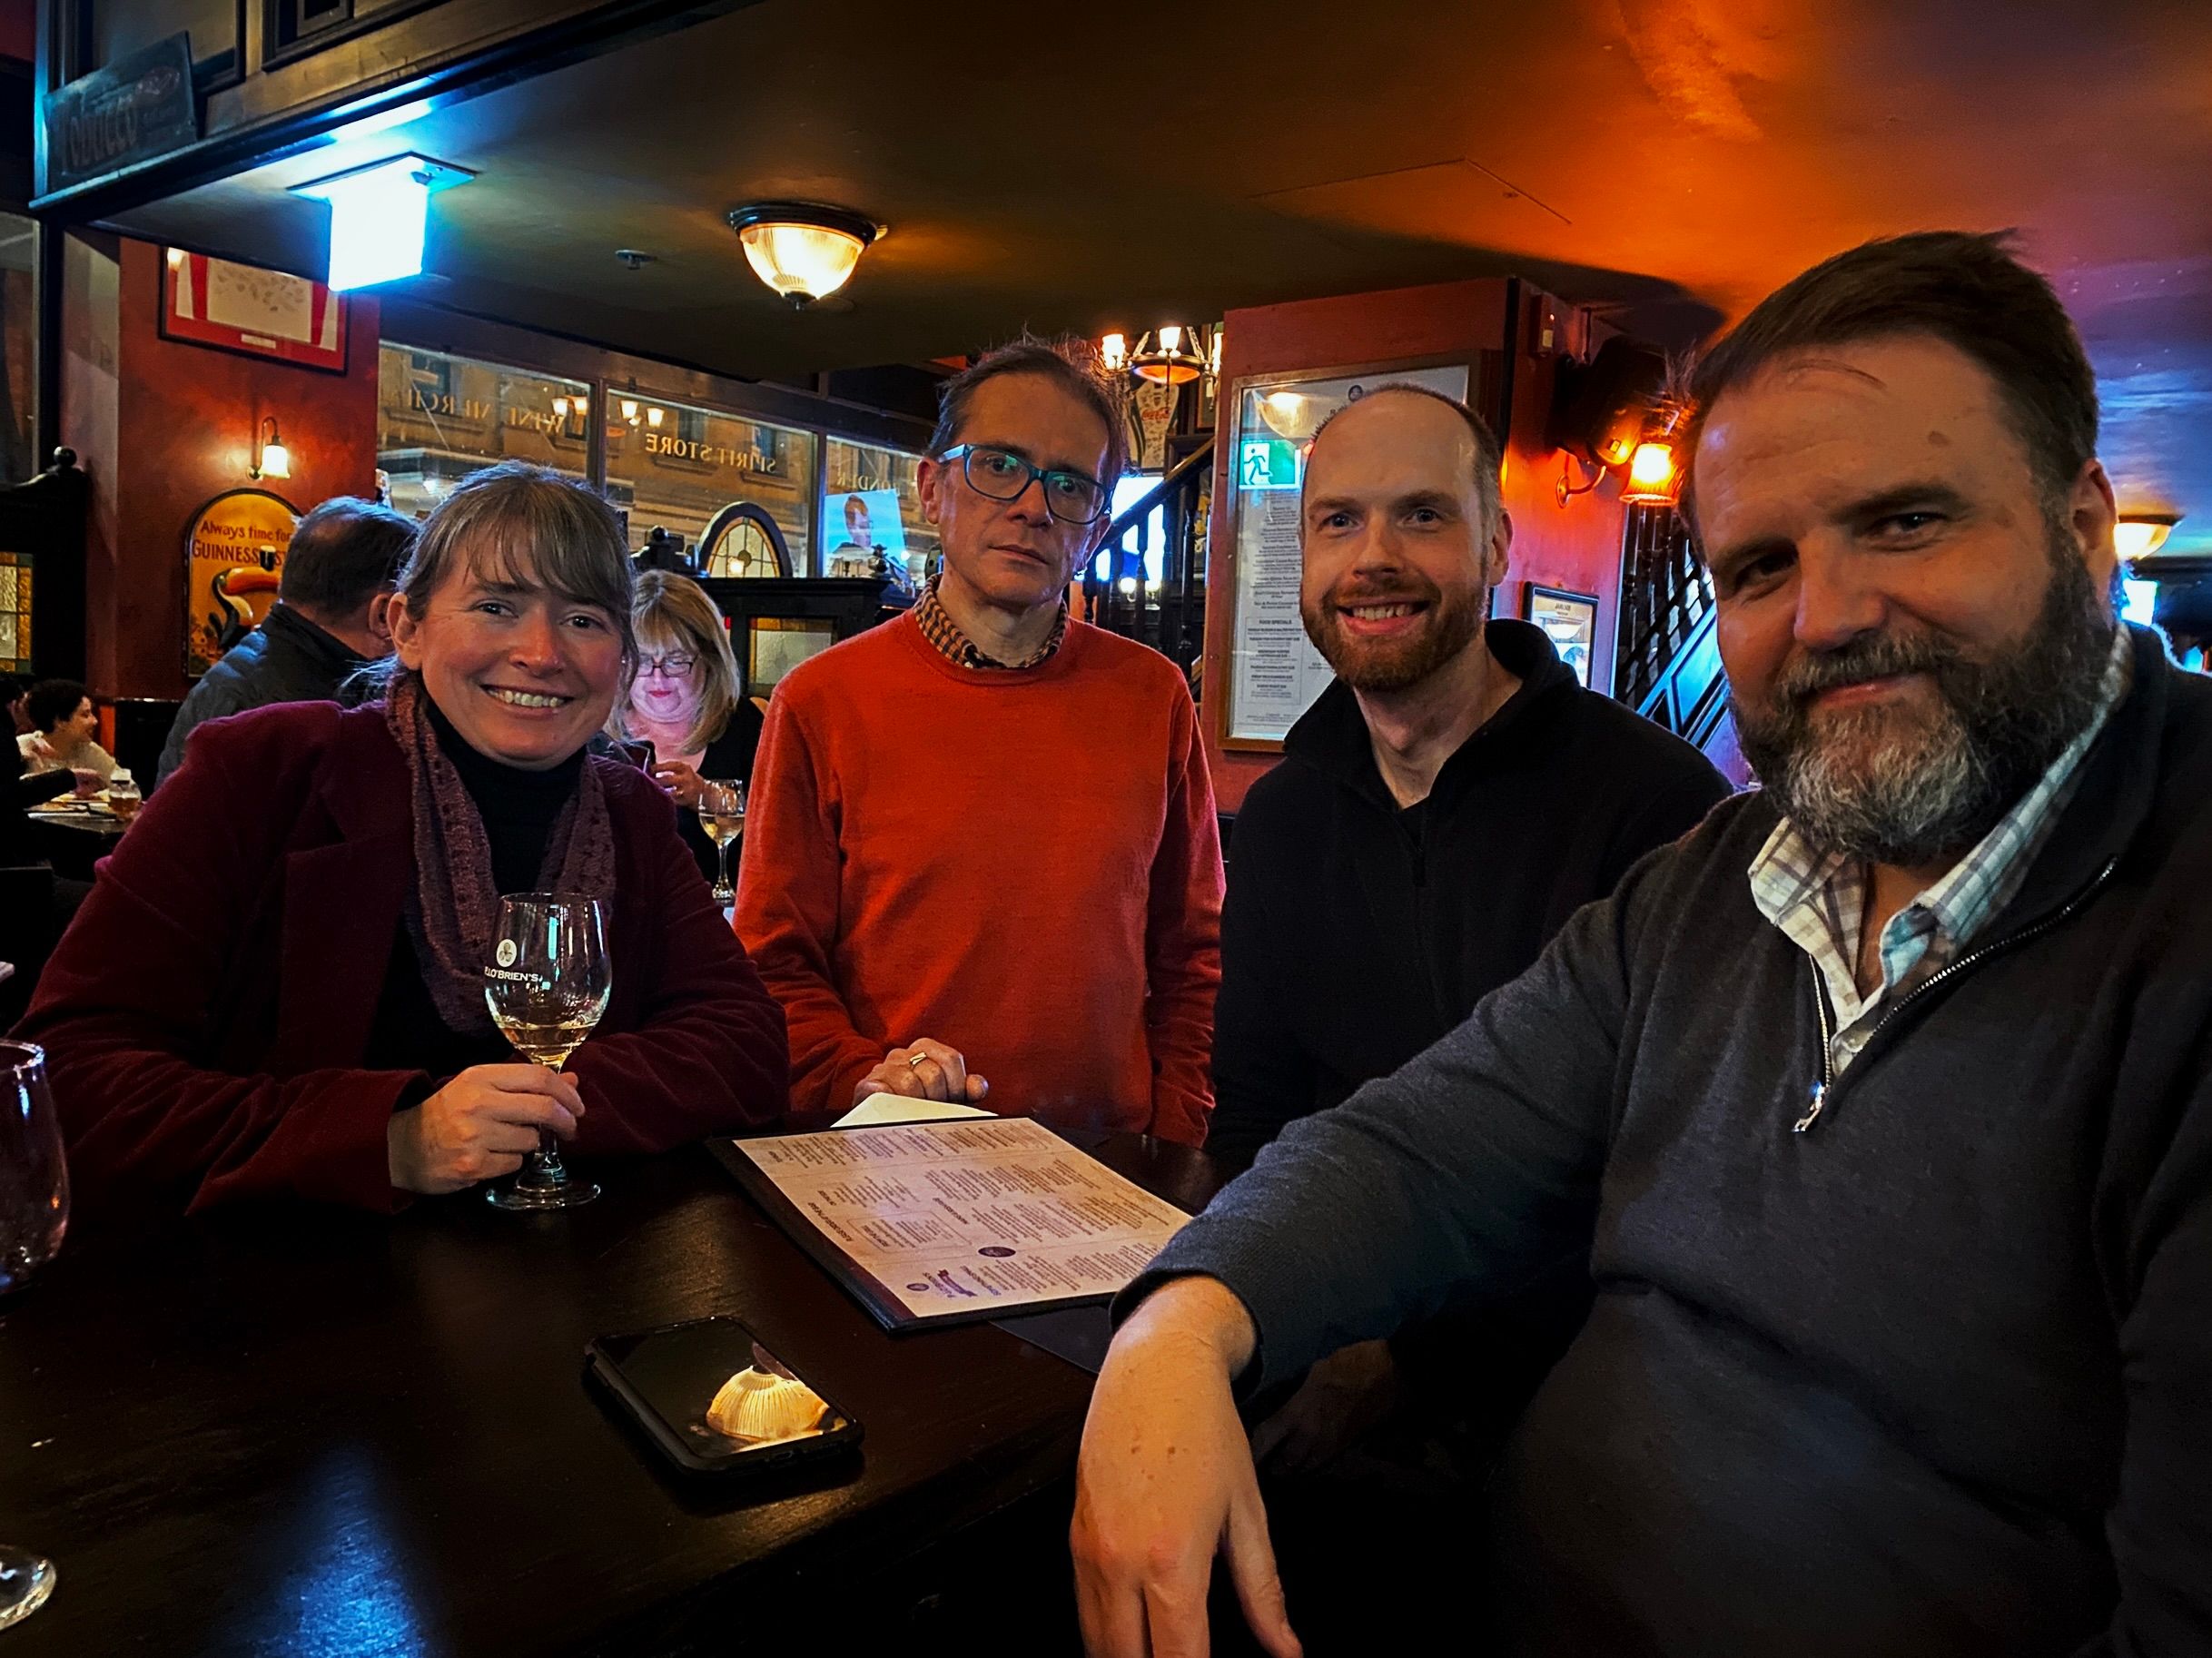 A photo of four people sitting in an Irish pub smiling at the camera.